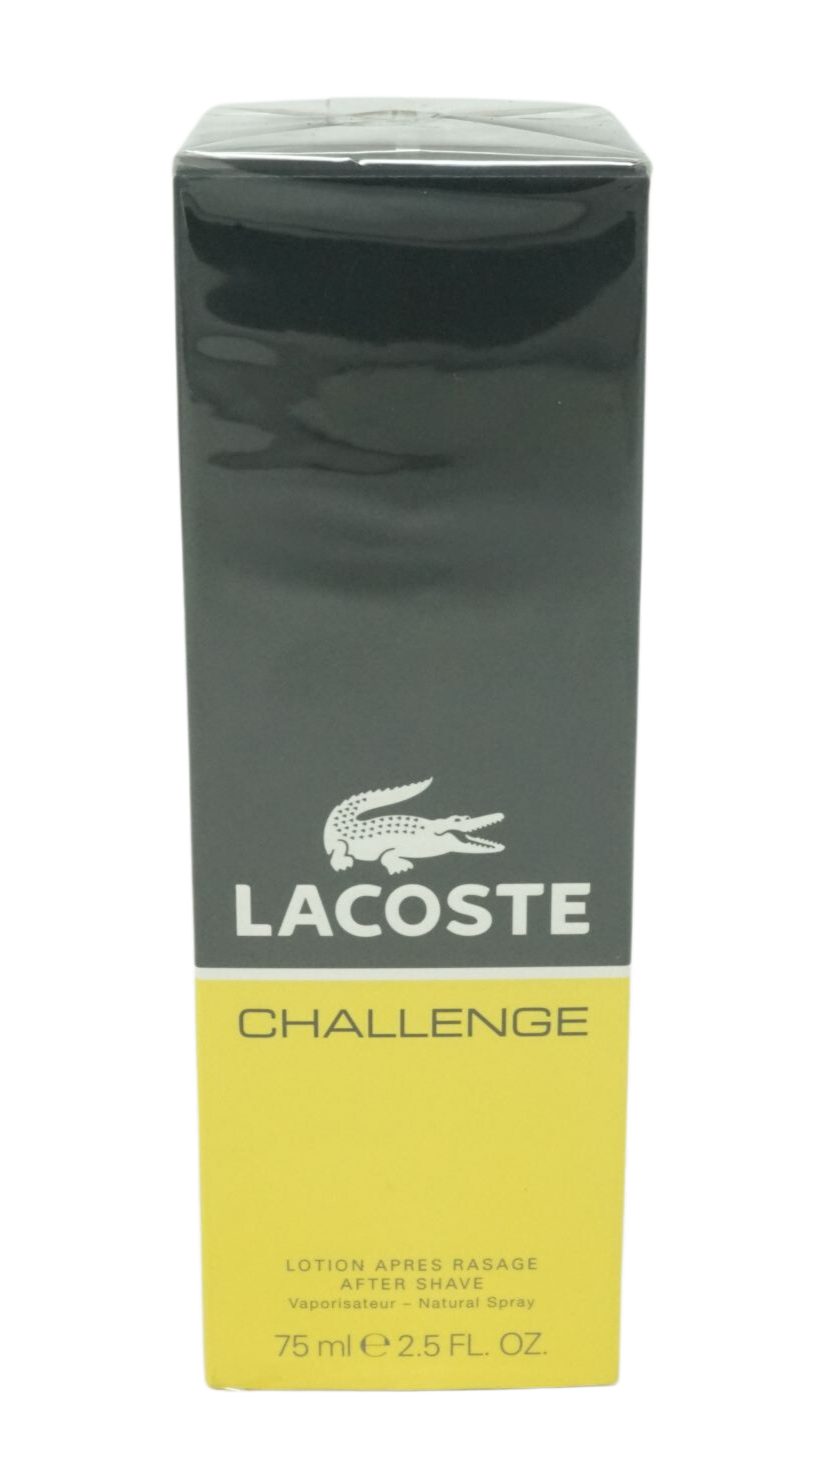 Lacoste Lacoste Challenge After After-Shave Shave 75ml